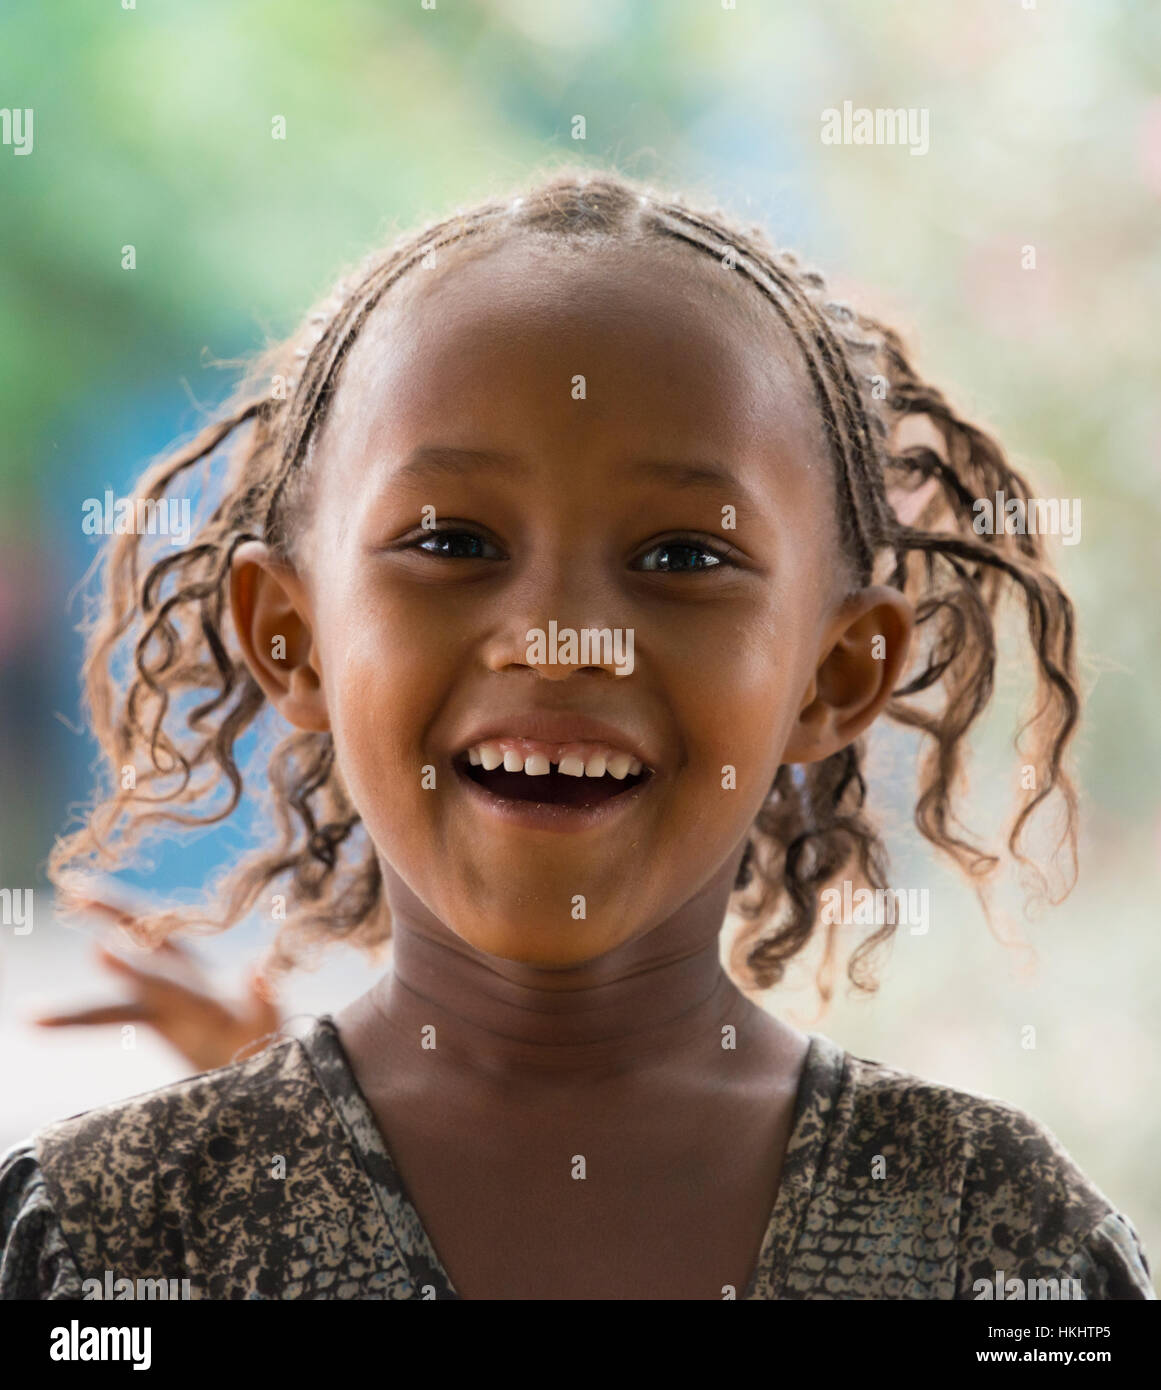 Young girl with braided hair, Mekele, Ethiopia Stock Photo